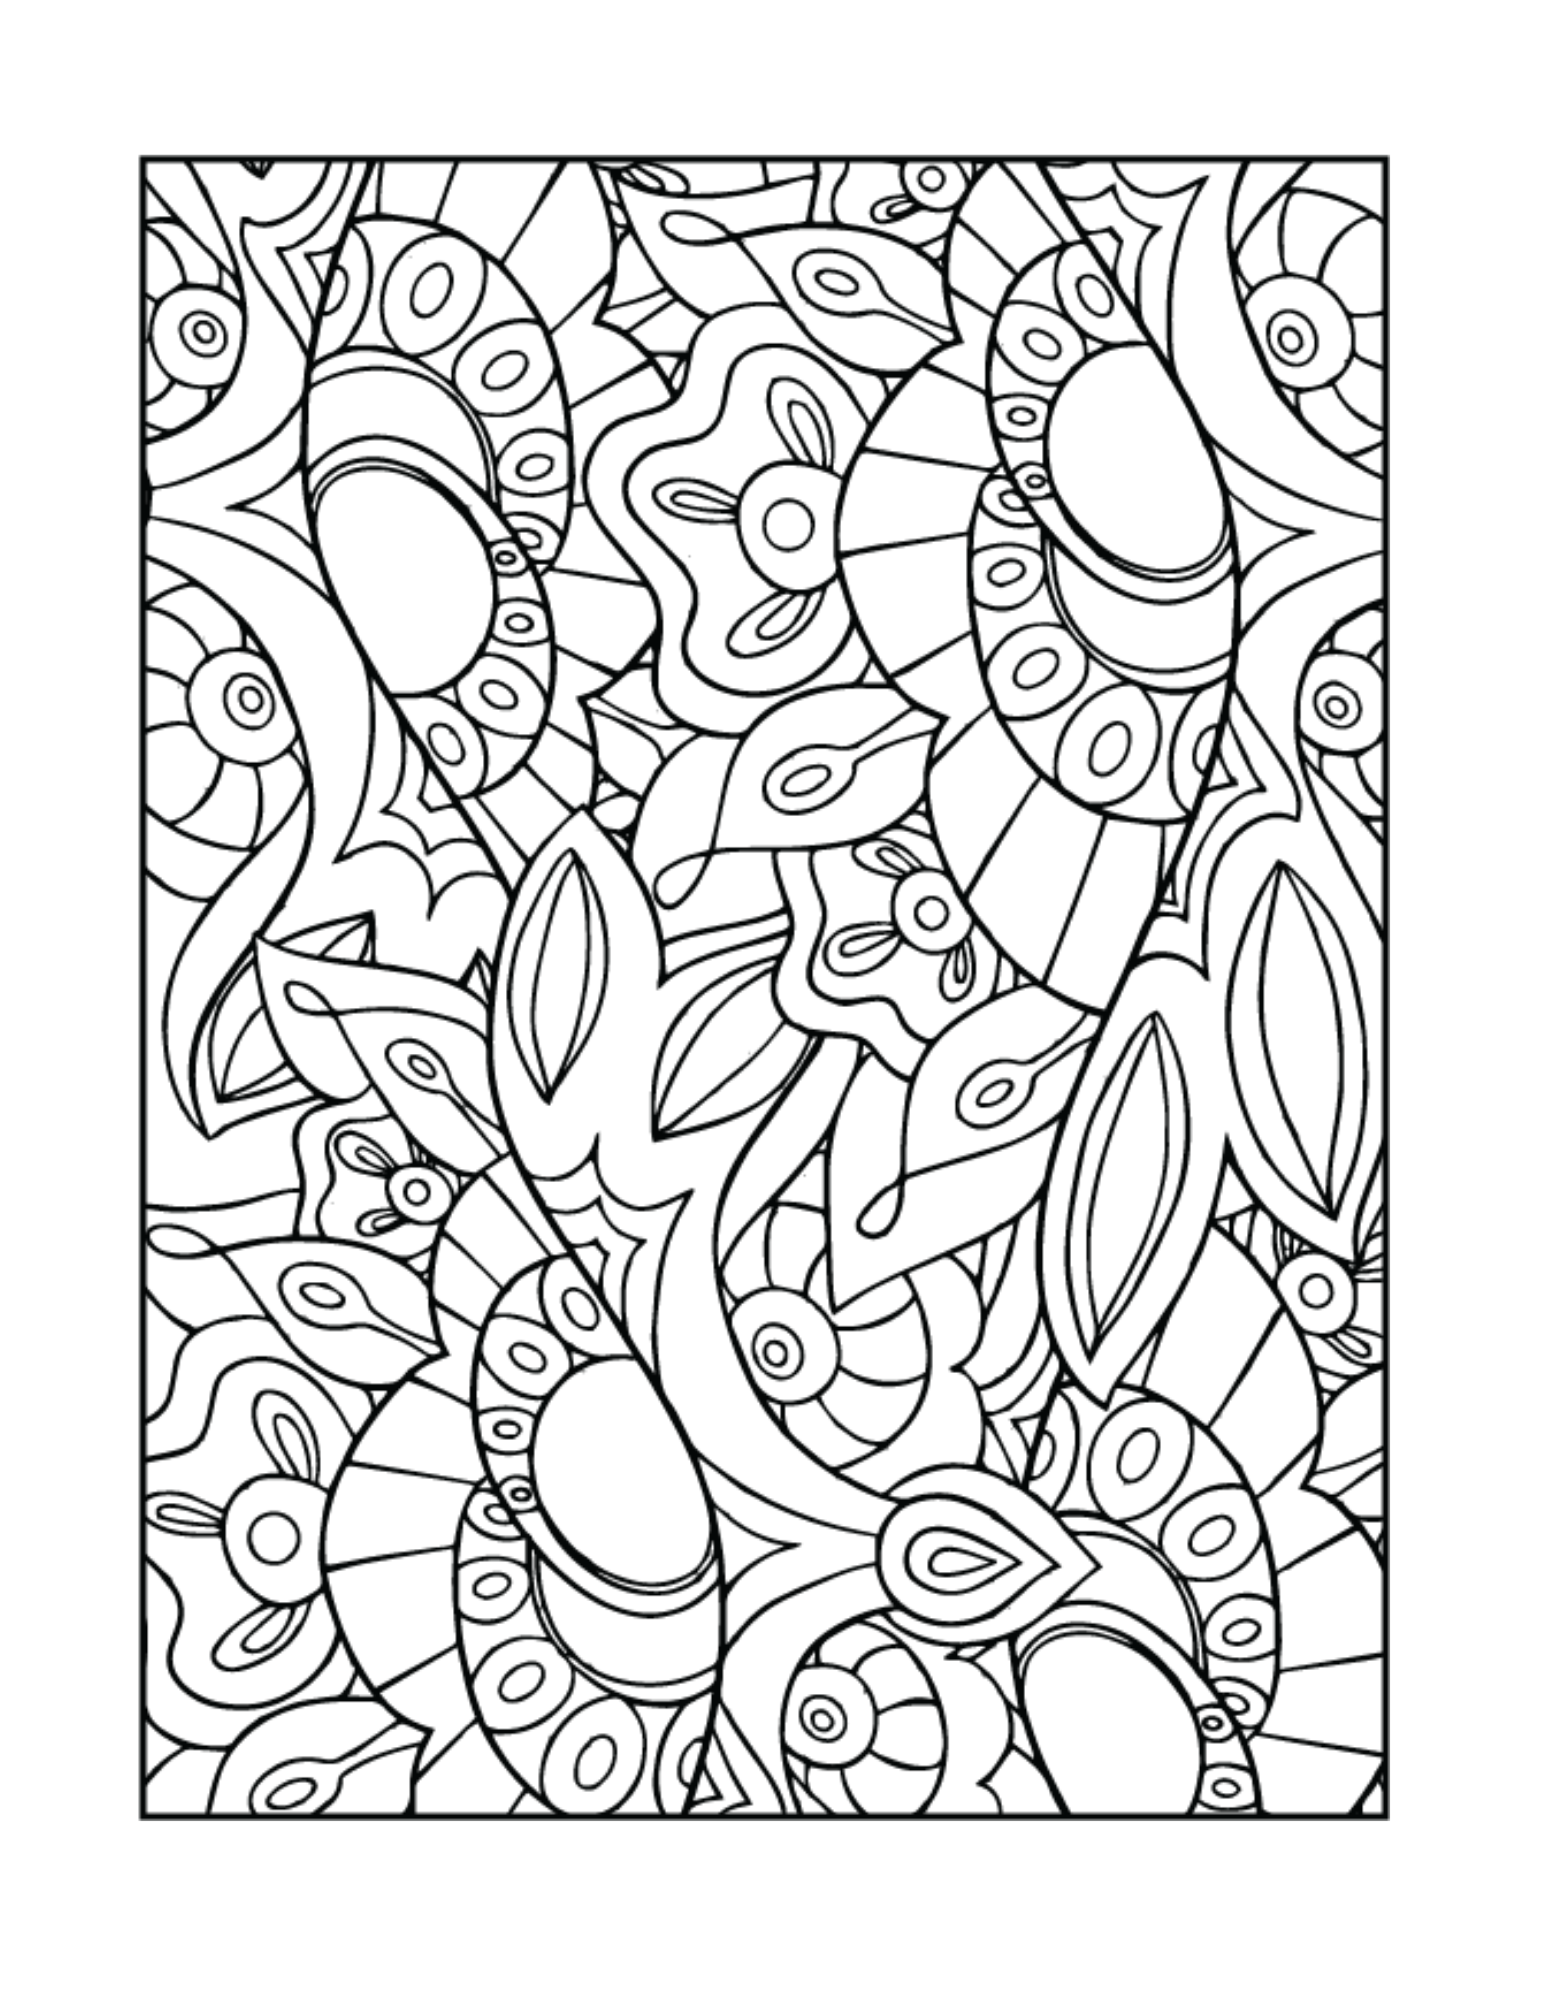 simple mandala art adult coloring book for relaxation and mental